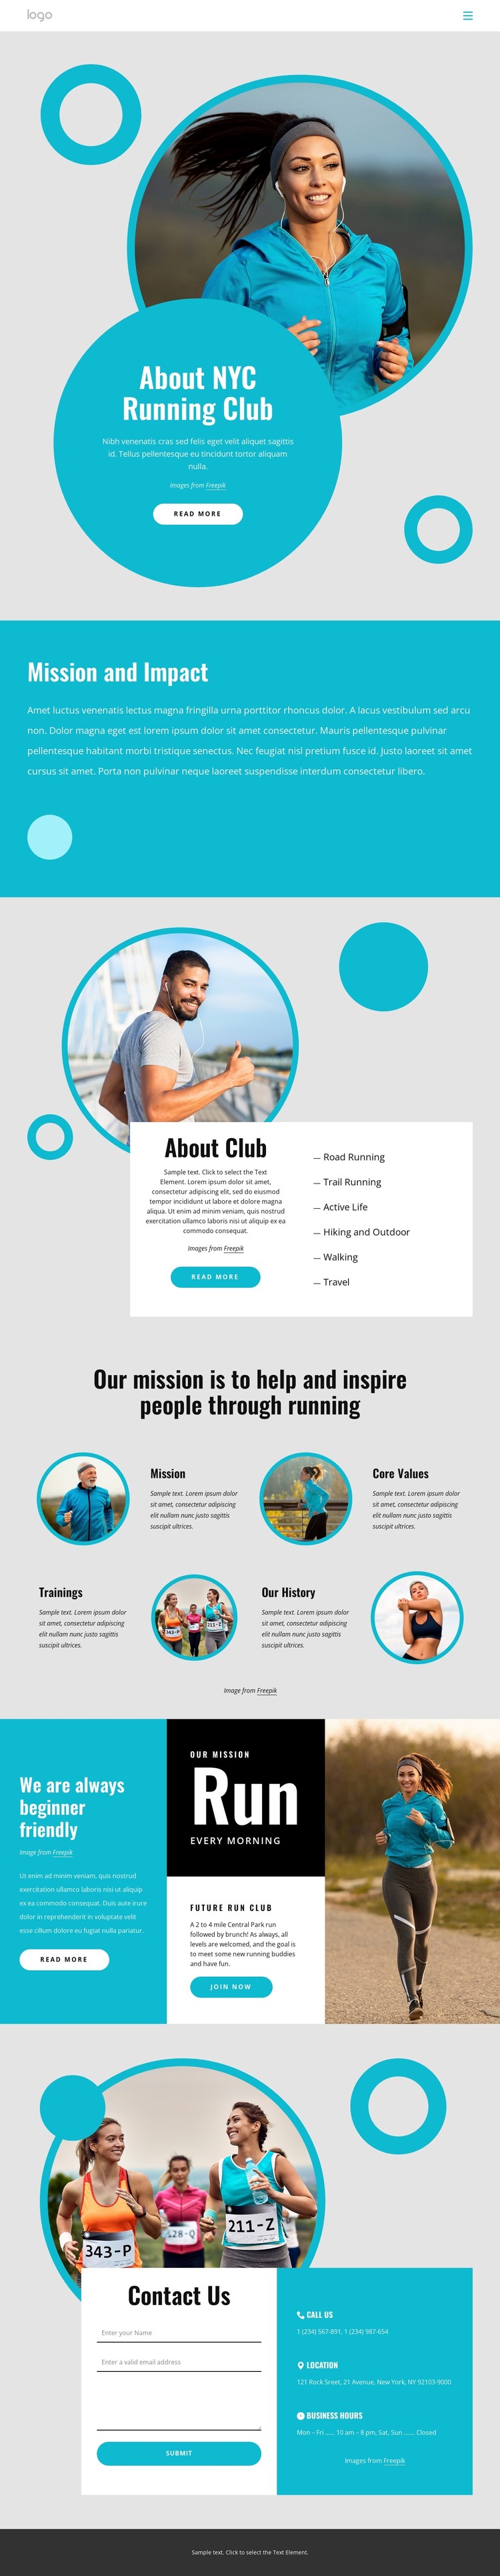 About NYC running club Web Design